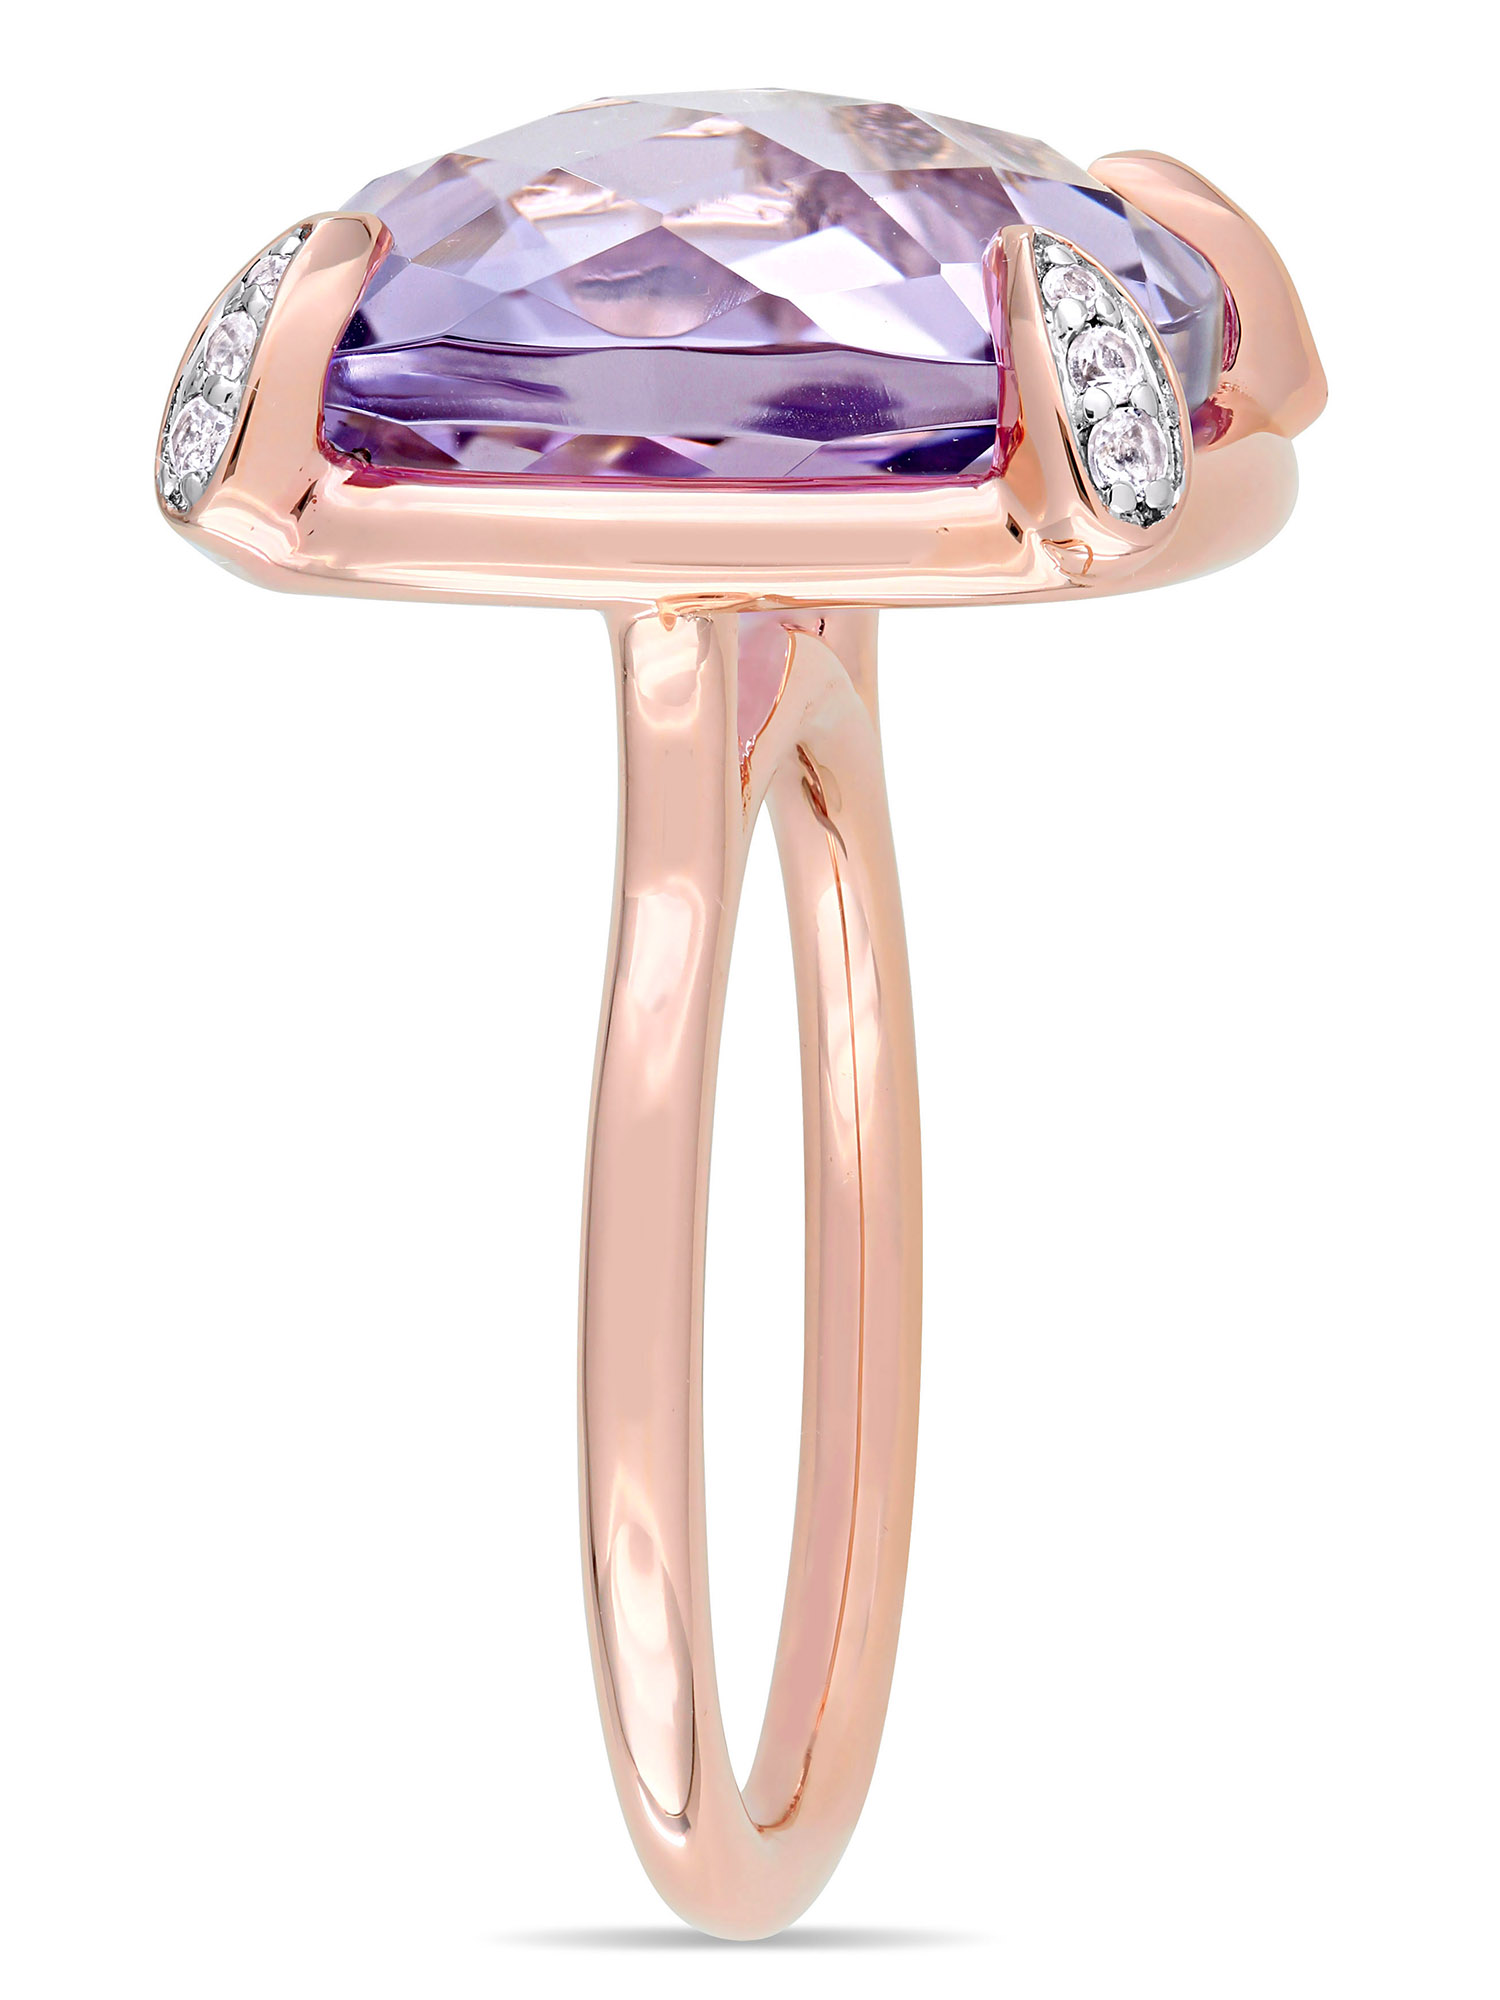 15-1/8 Carat T.G.W. Rose de France and White Sapphire 14kt Rose Gold Cocktail Ring - image 3 of 7